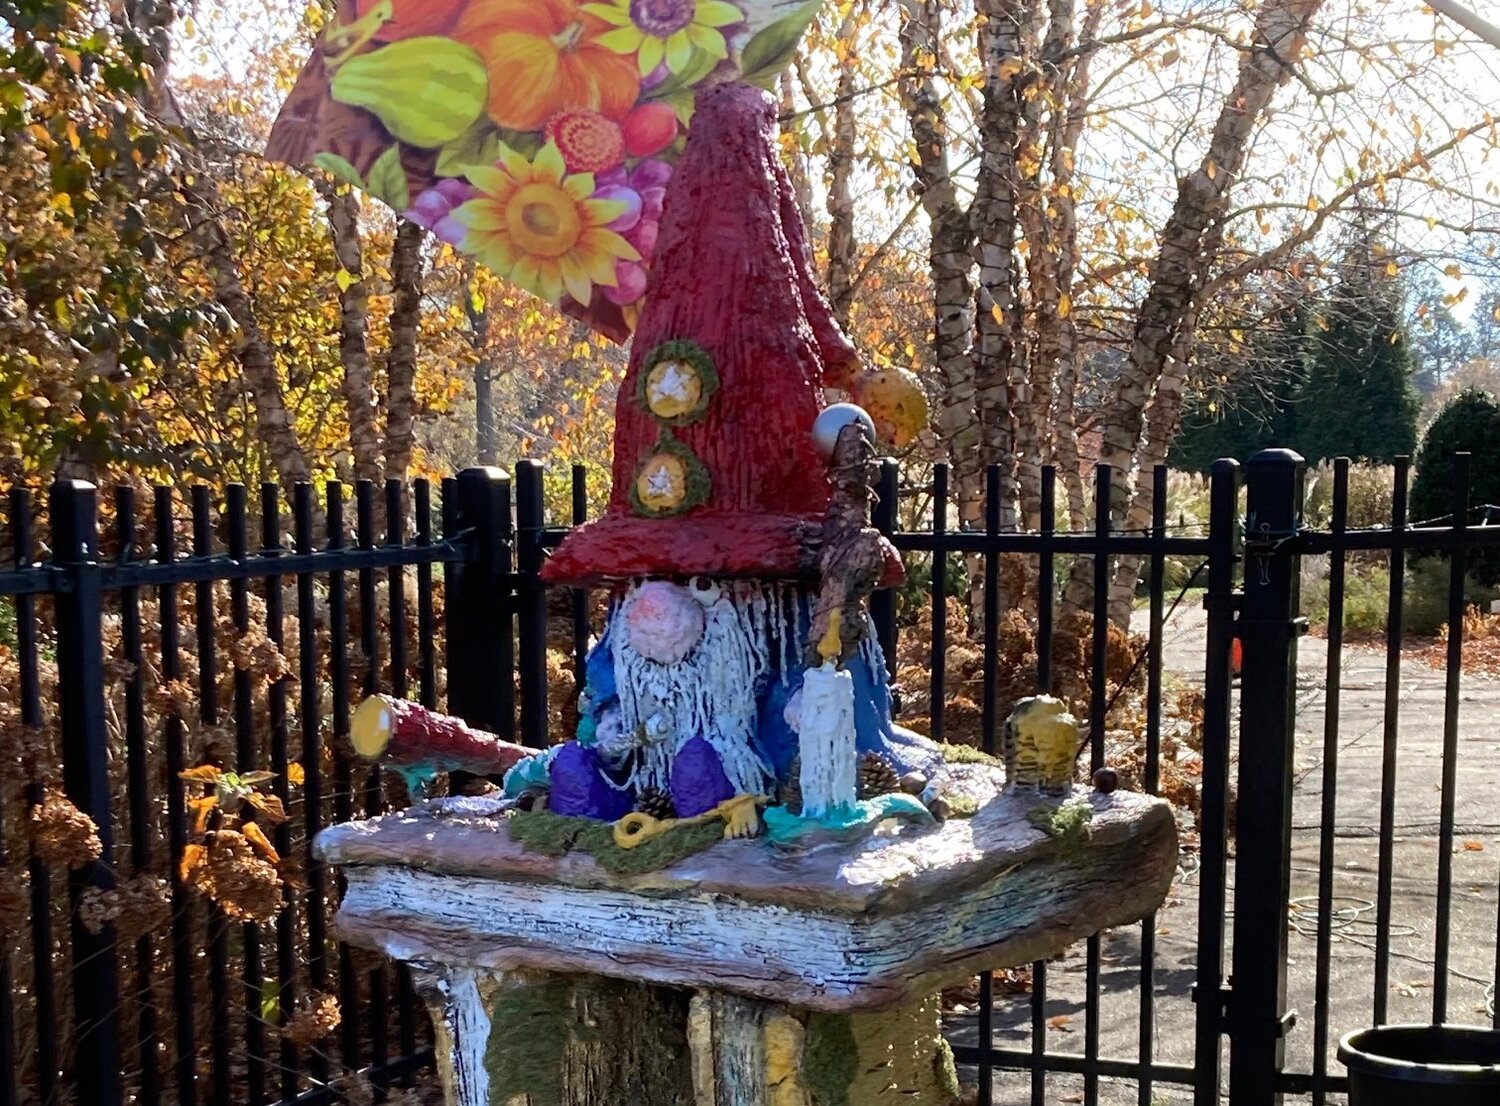 Pay a visit to Gnomeberto The Wise during the last weekend of Roger Williams Park Botanical Center's Gnomevember